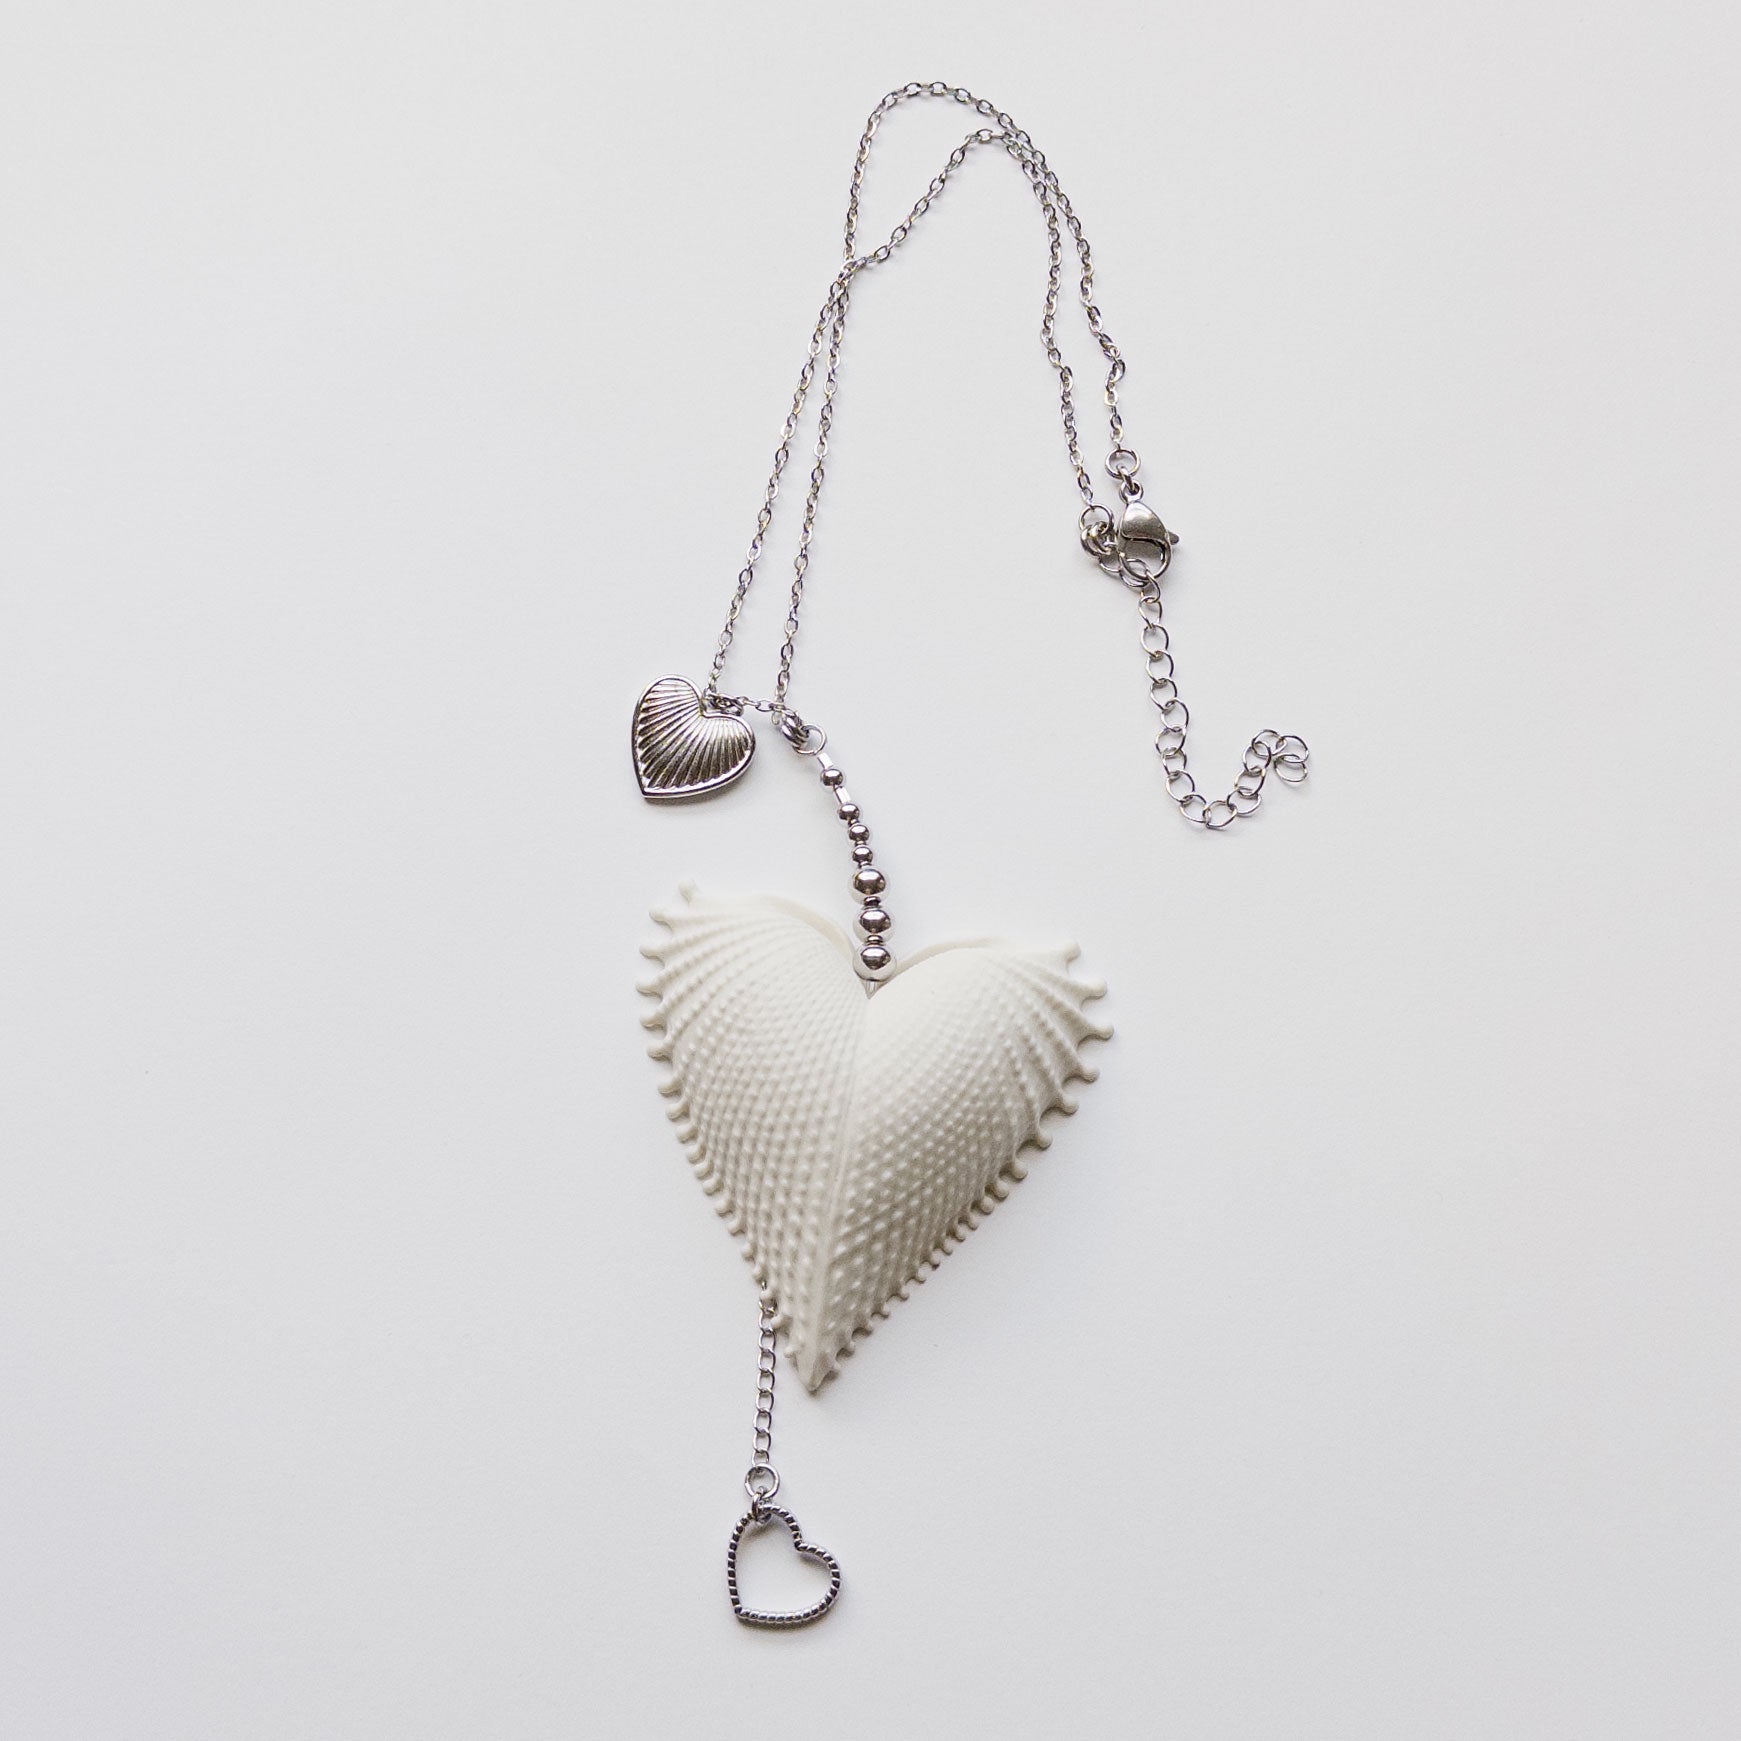 Multi charms necklace featuring a large vintage scallop heart, stainless steel heart charms, on a stainless steel chain. mermaid jewelry